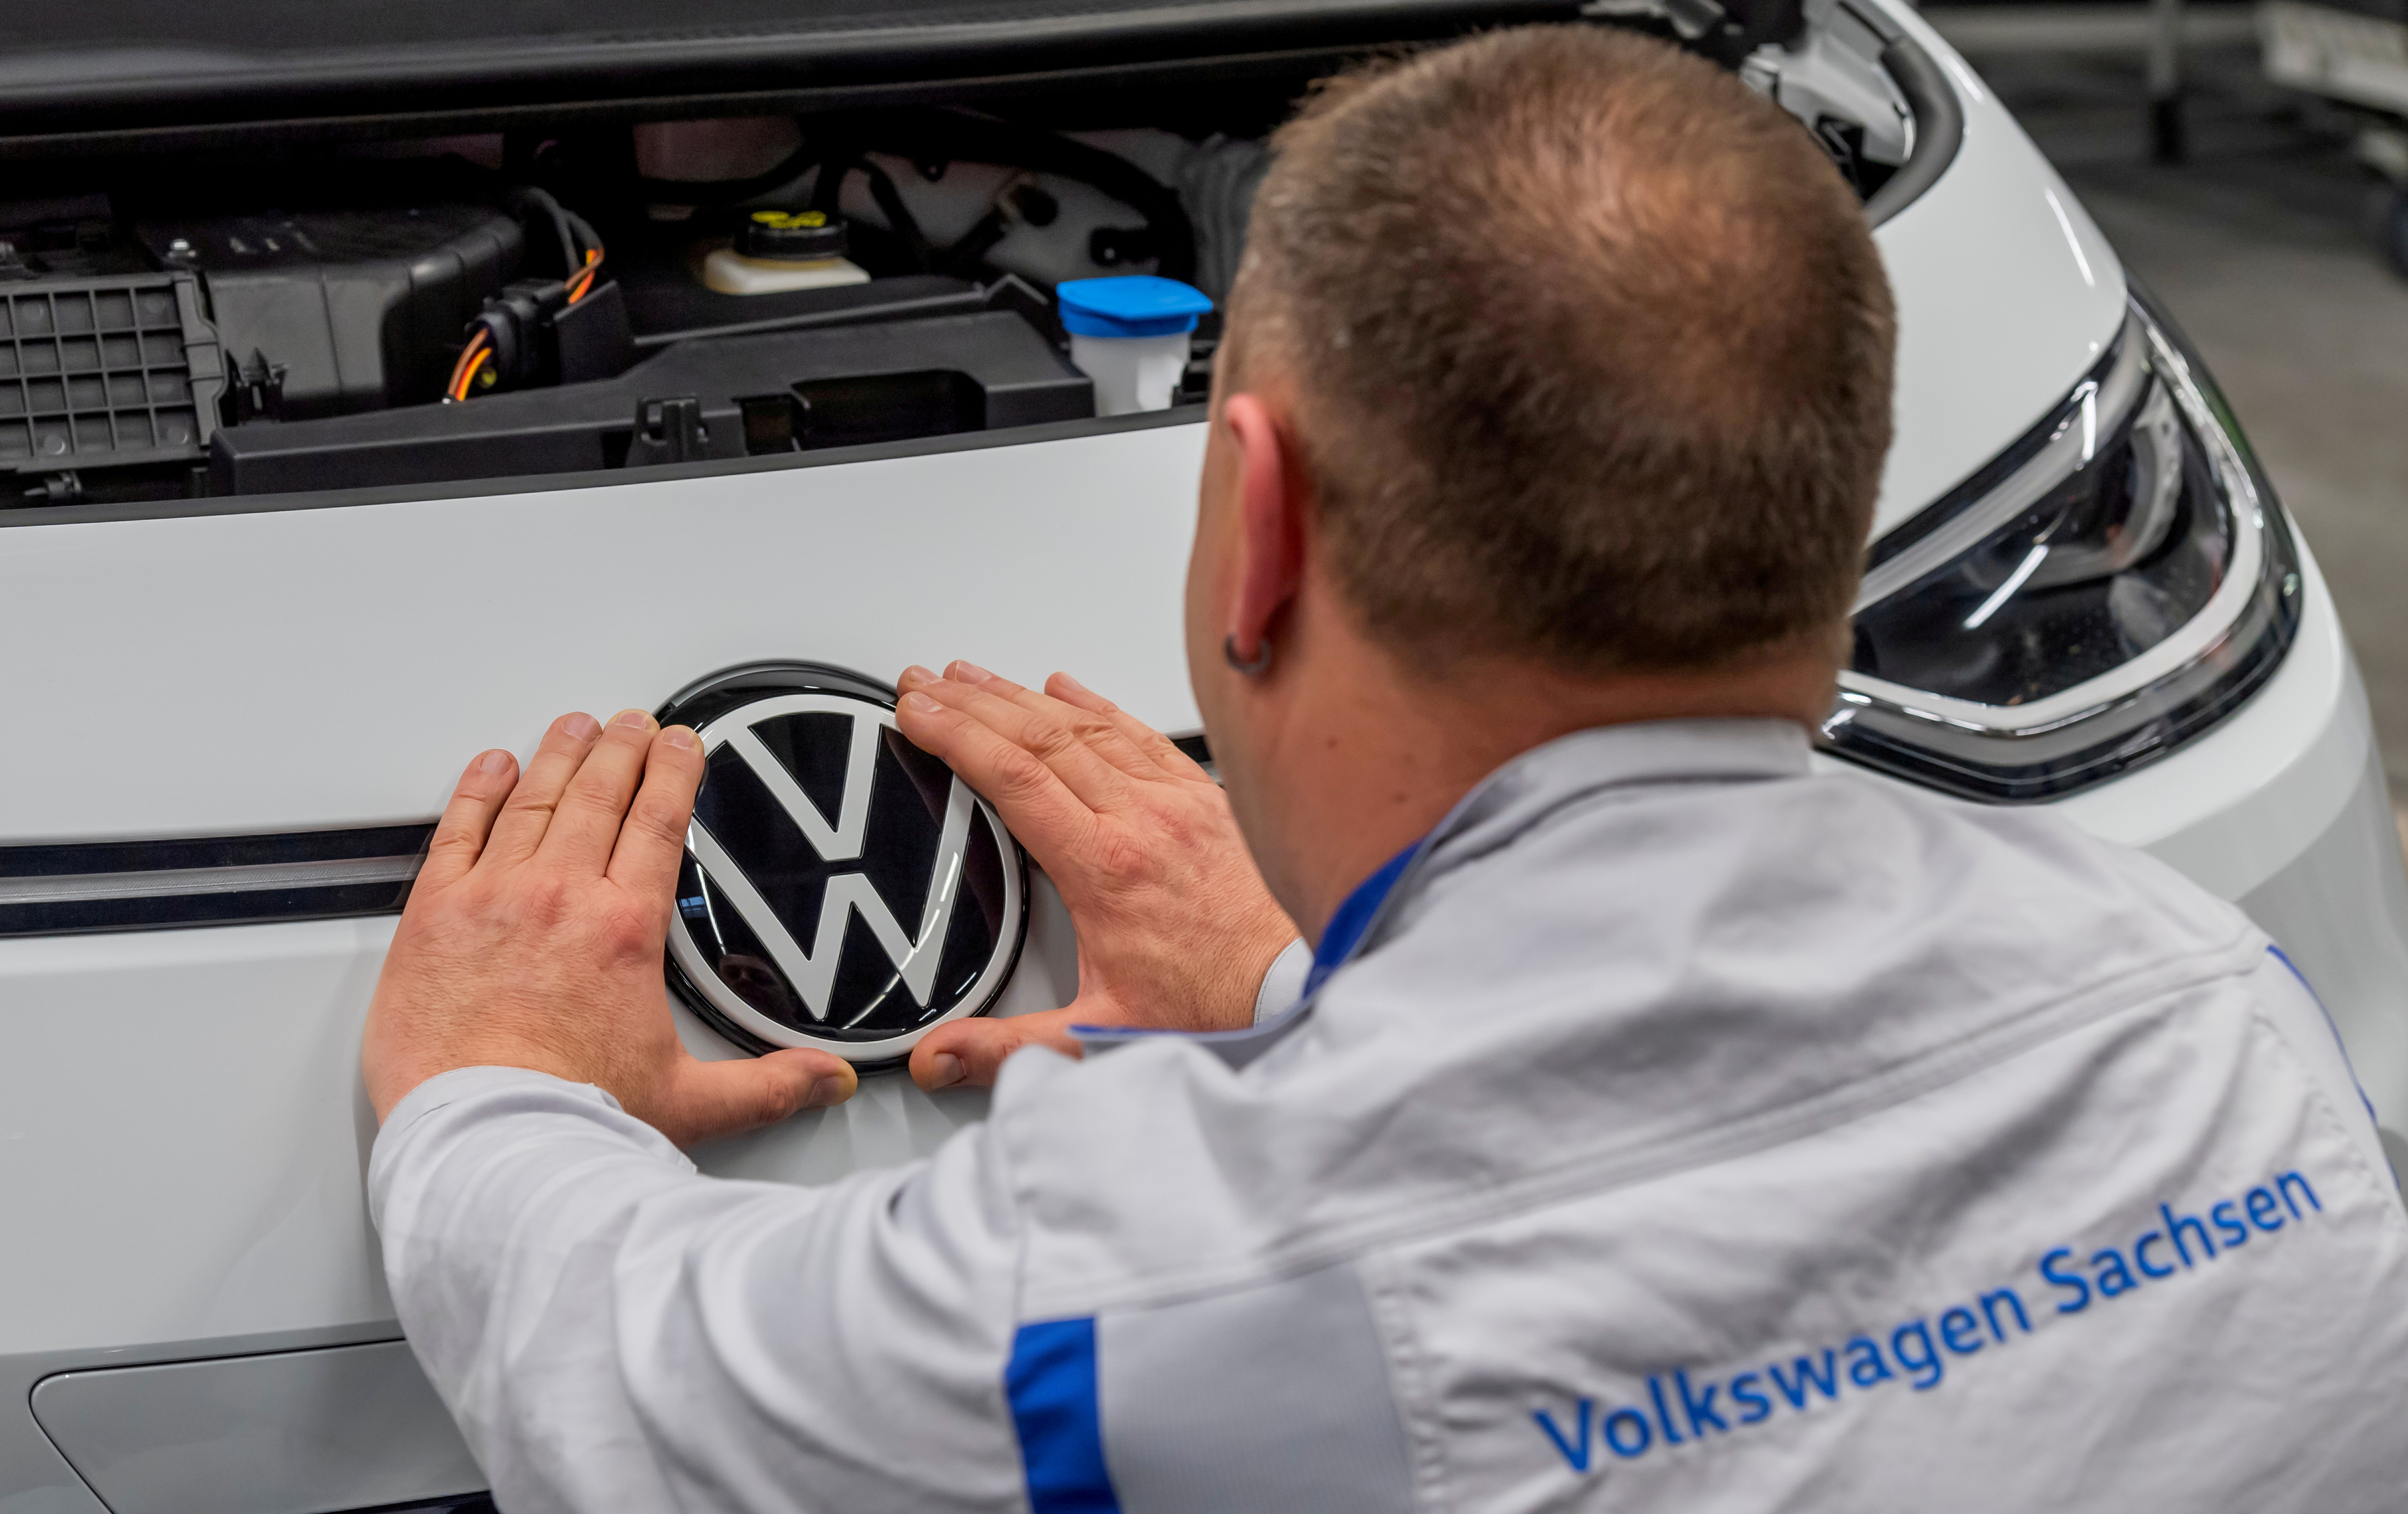 An employee fixes a VW sign at a production line of the electric Volkswagen model ID.3 in Zwickau, Germany, February 25, 2020. REUTERS/Matthias Rietschel